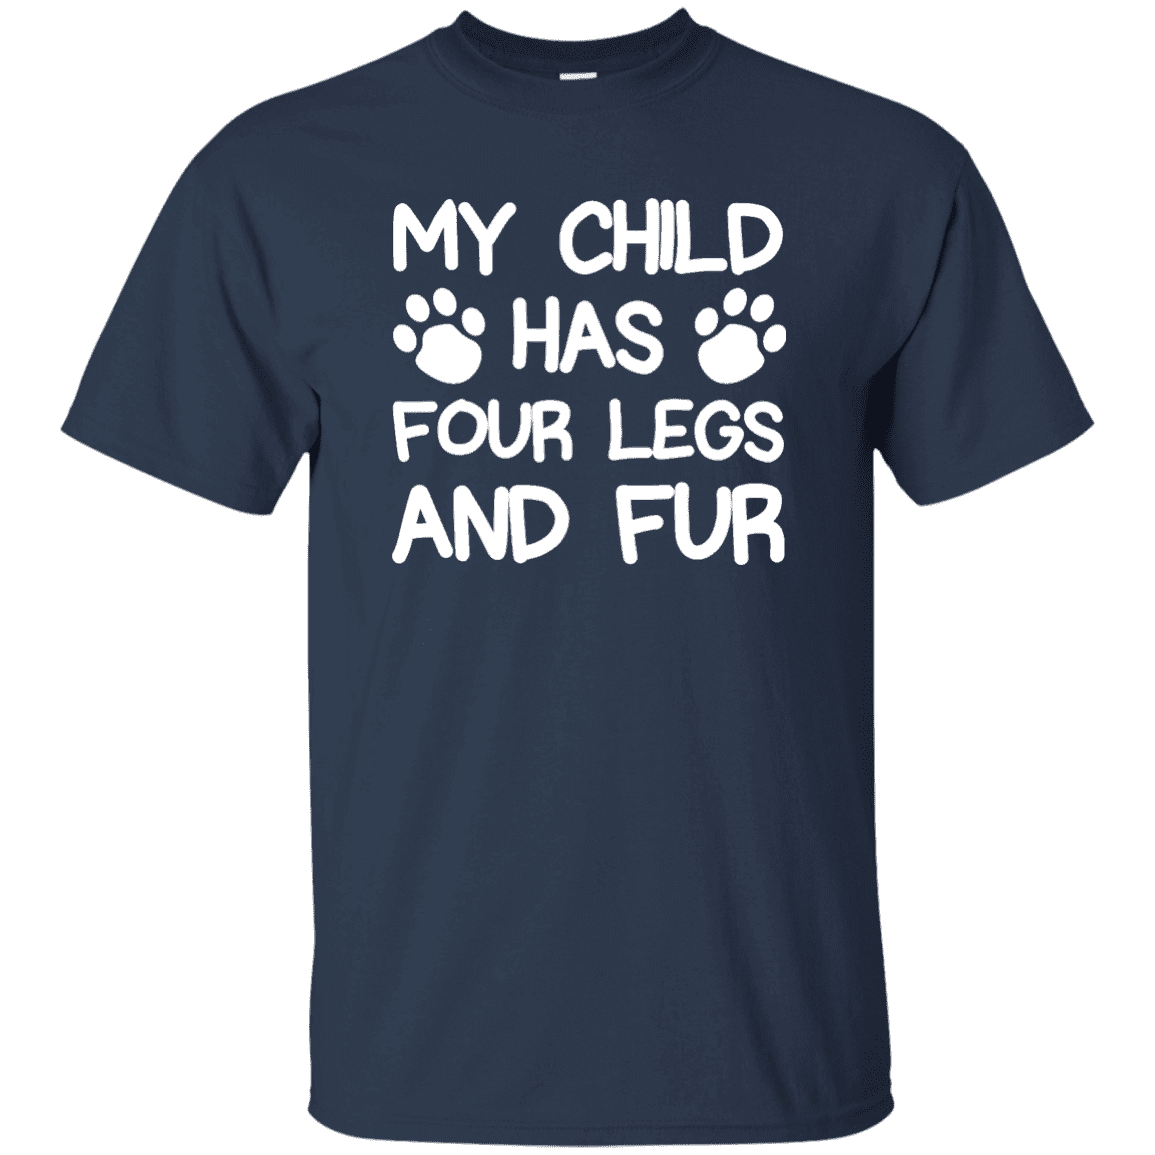 Four Legs And Fur - T Shirt.